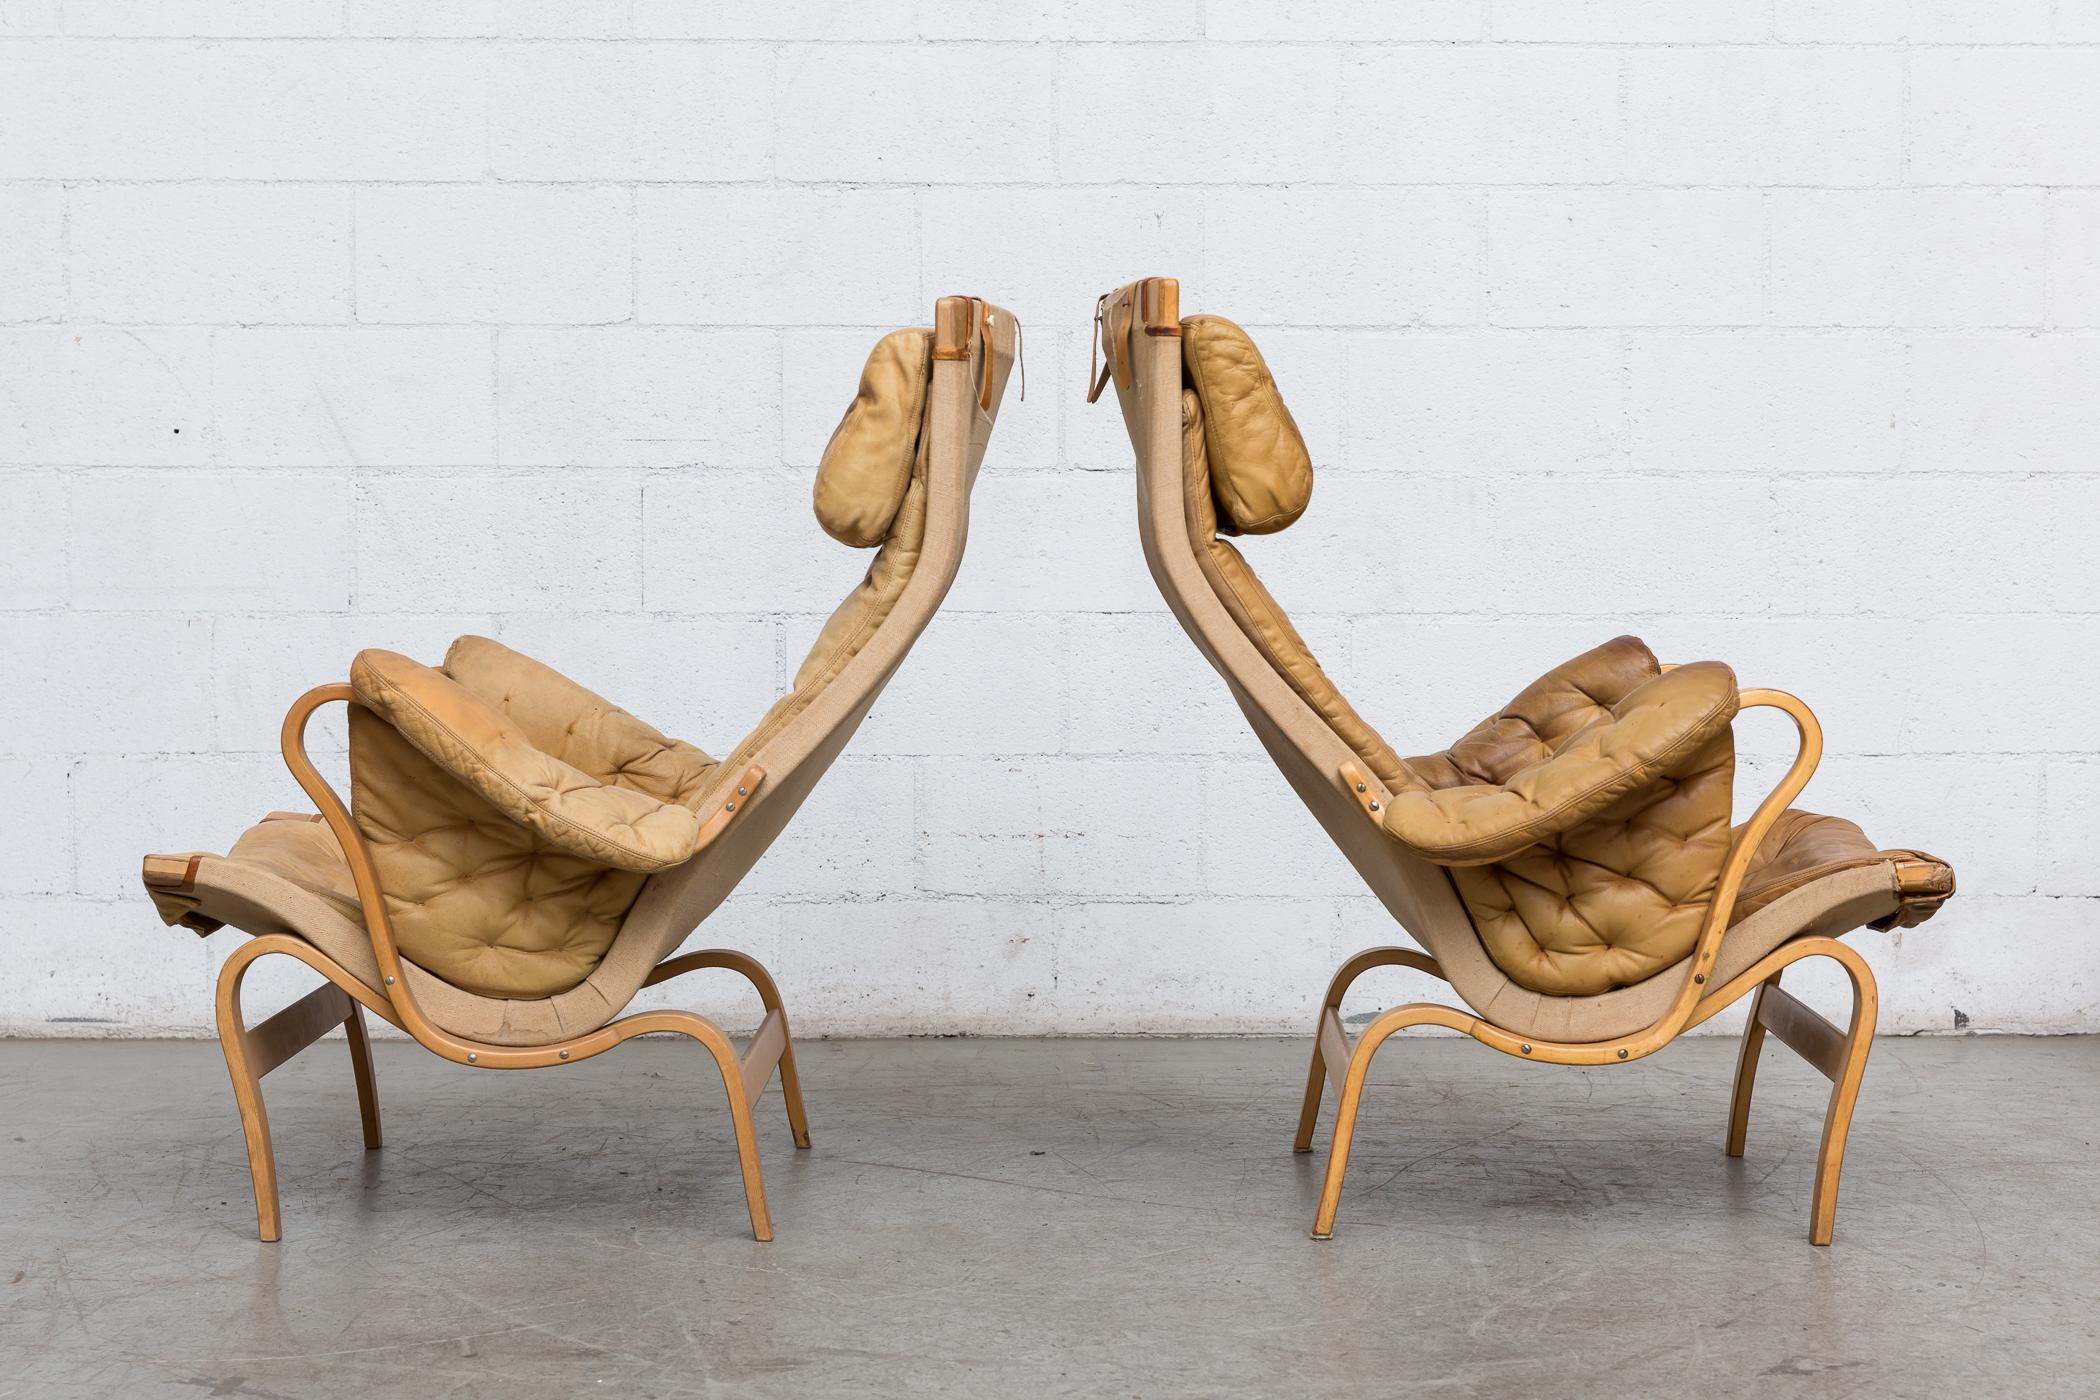 Very worn and well used pair of 1970s 'Pernilla' lounge chairs with arms by Bruno Mathsson for DUX. Completely original with extreme wear, one has visible bite marks from a dog. Natural leather and canvas. Sold as is, set price.